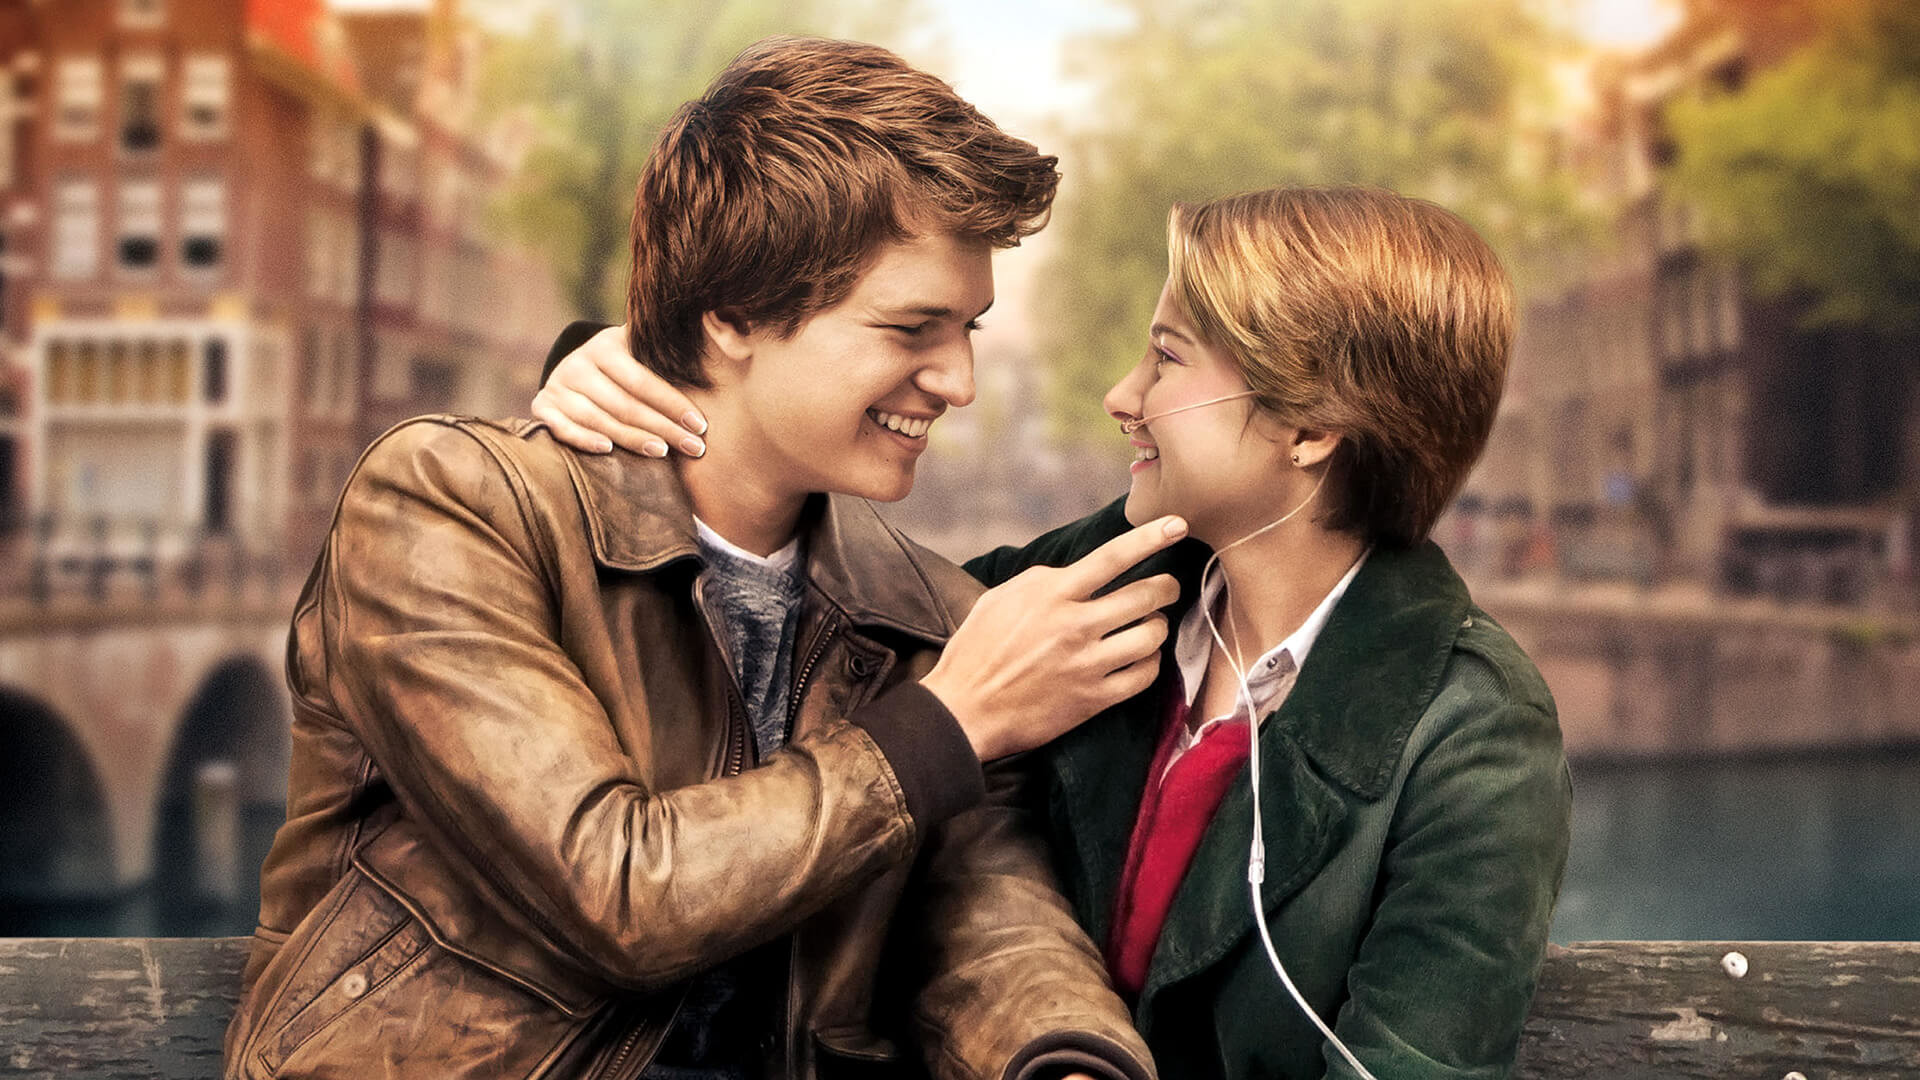 1920x1080 Movie - The Fault in Our Stars Shailene Woodley Ansel Elgort Wallpaper